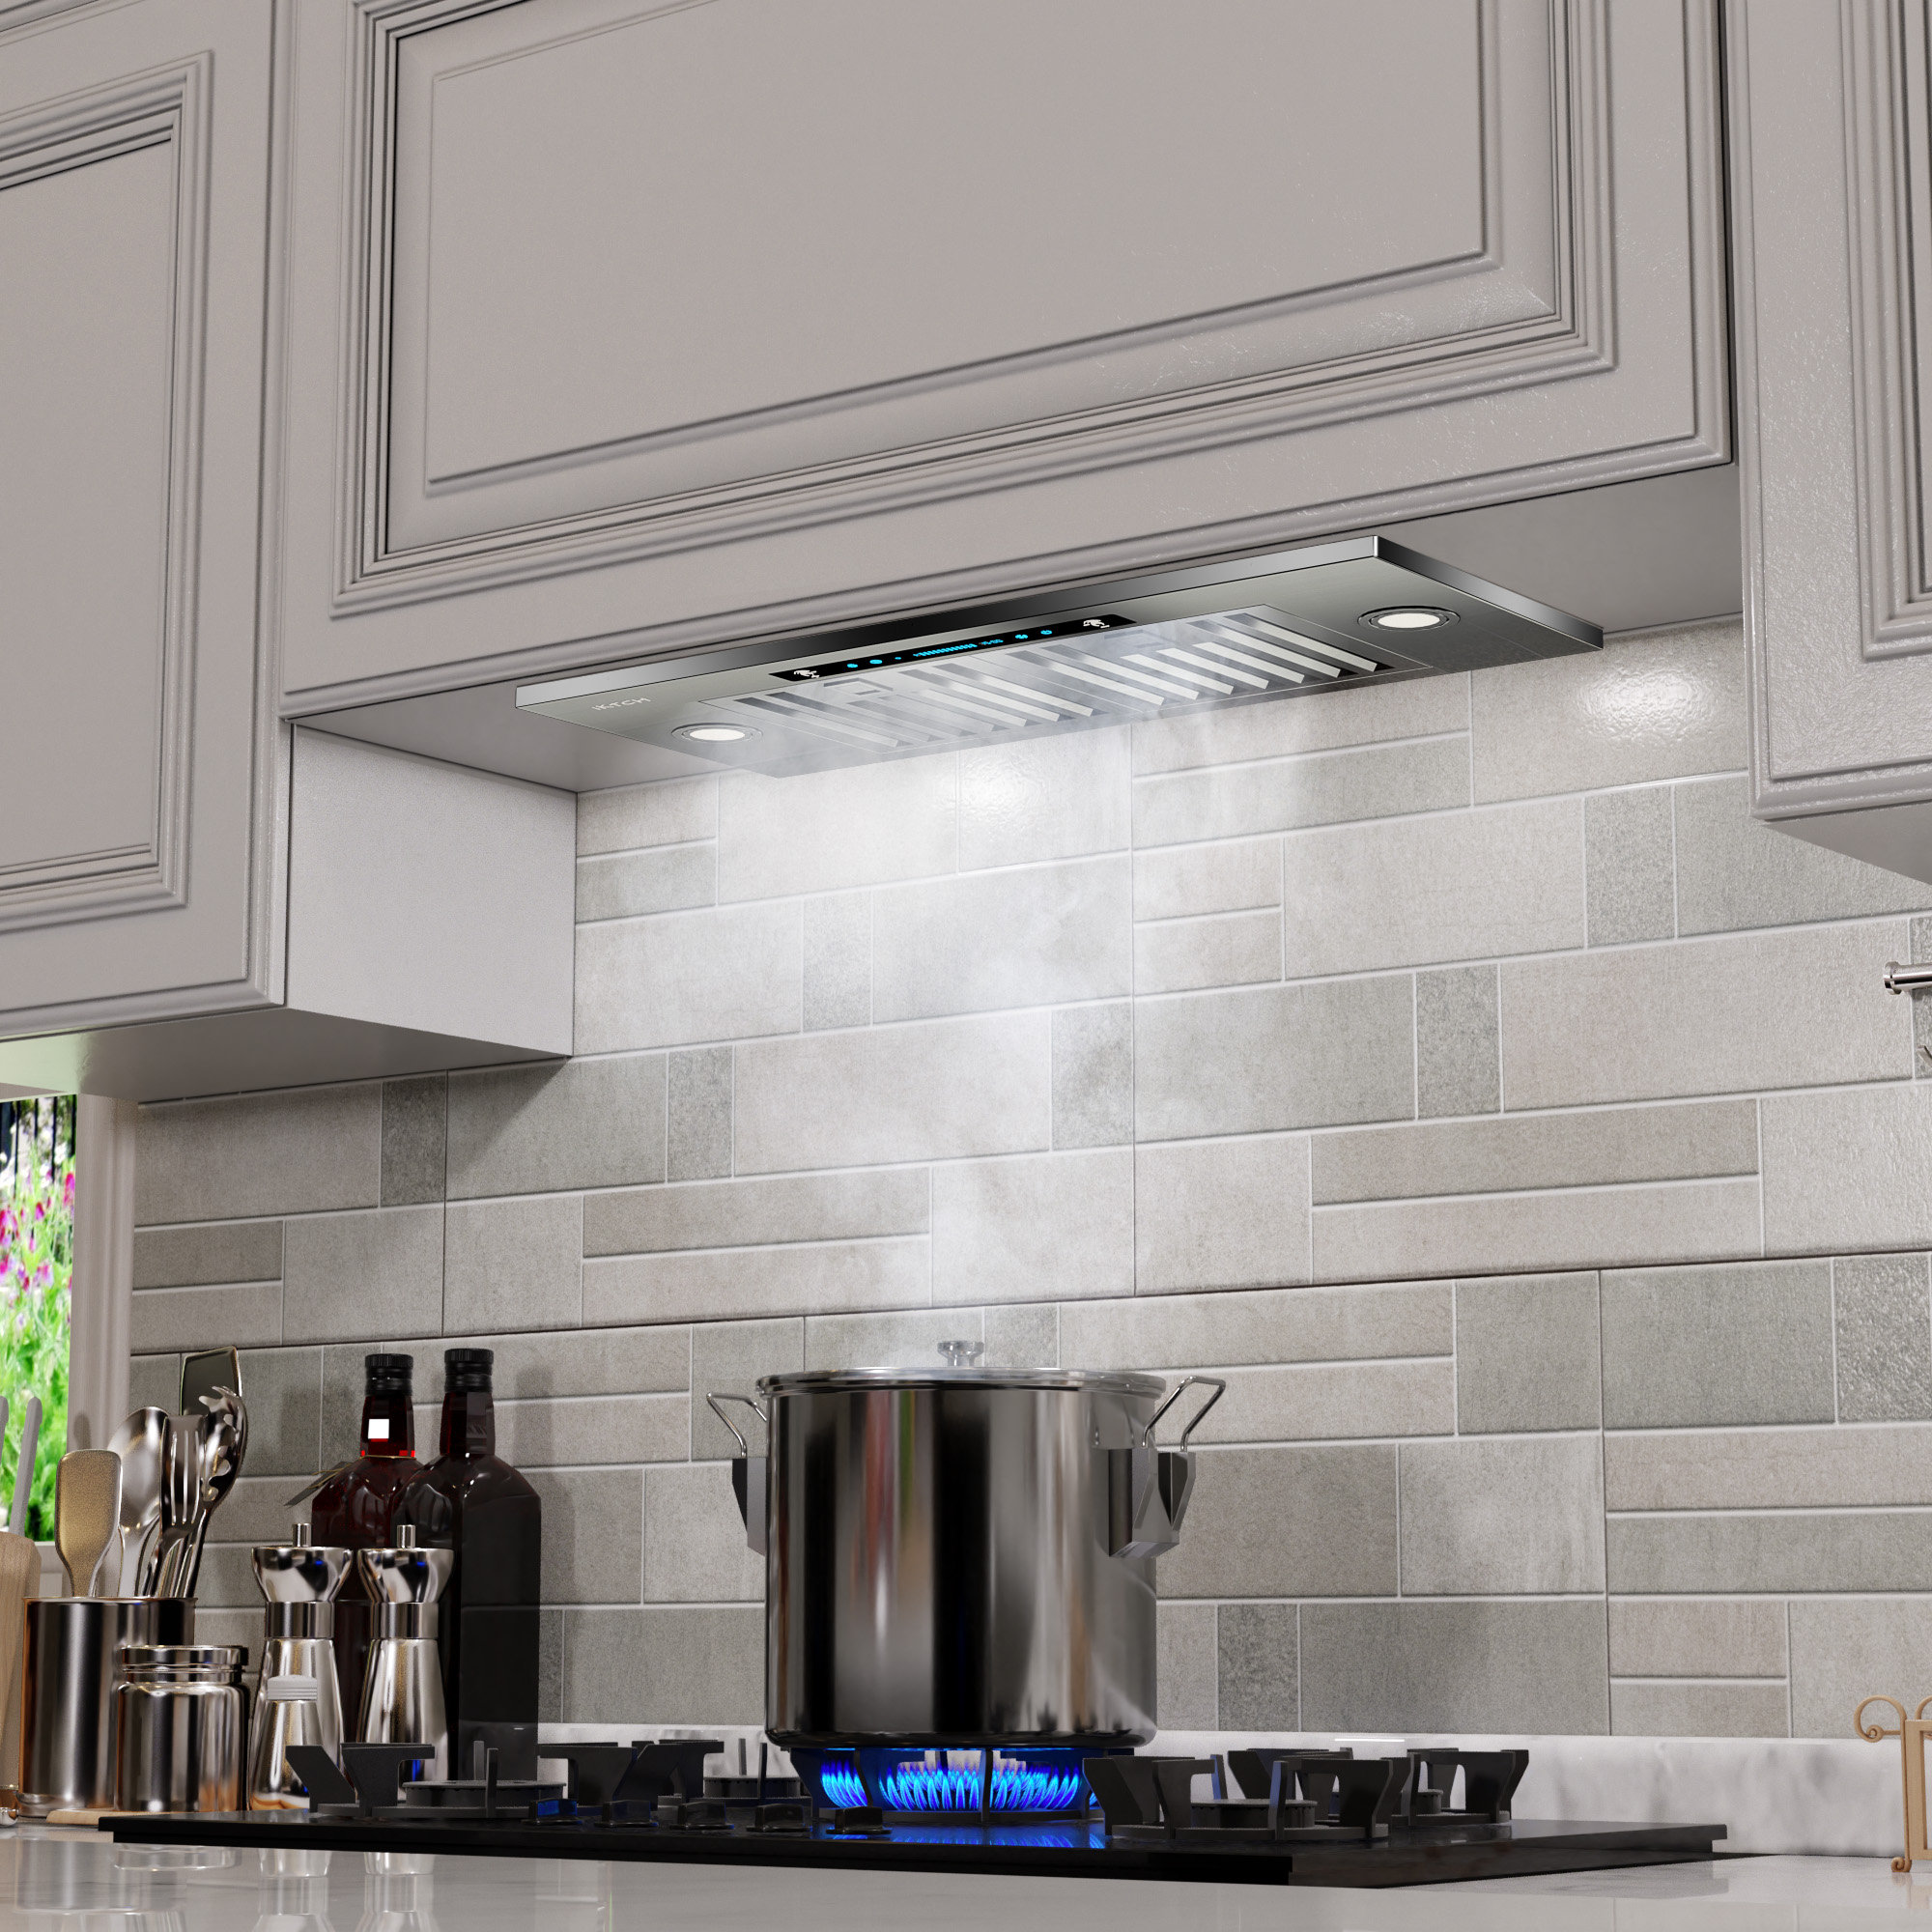 China Customized Wall Mount Range Hood Rear Vent Suppliers